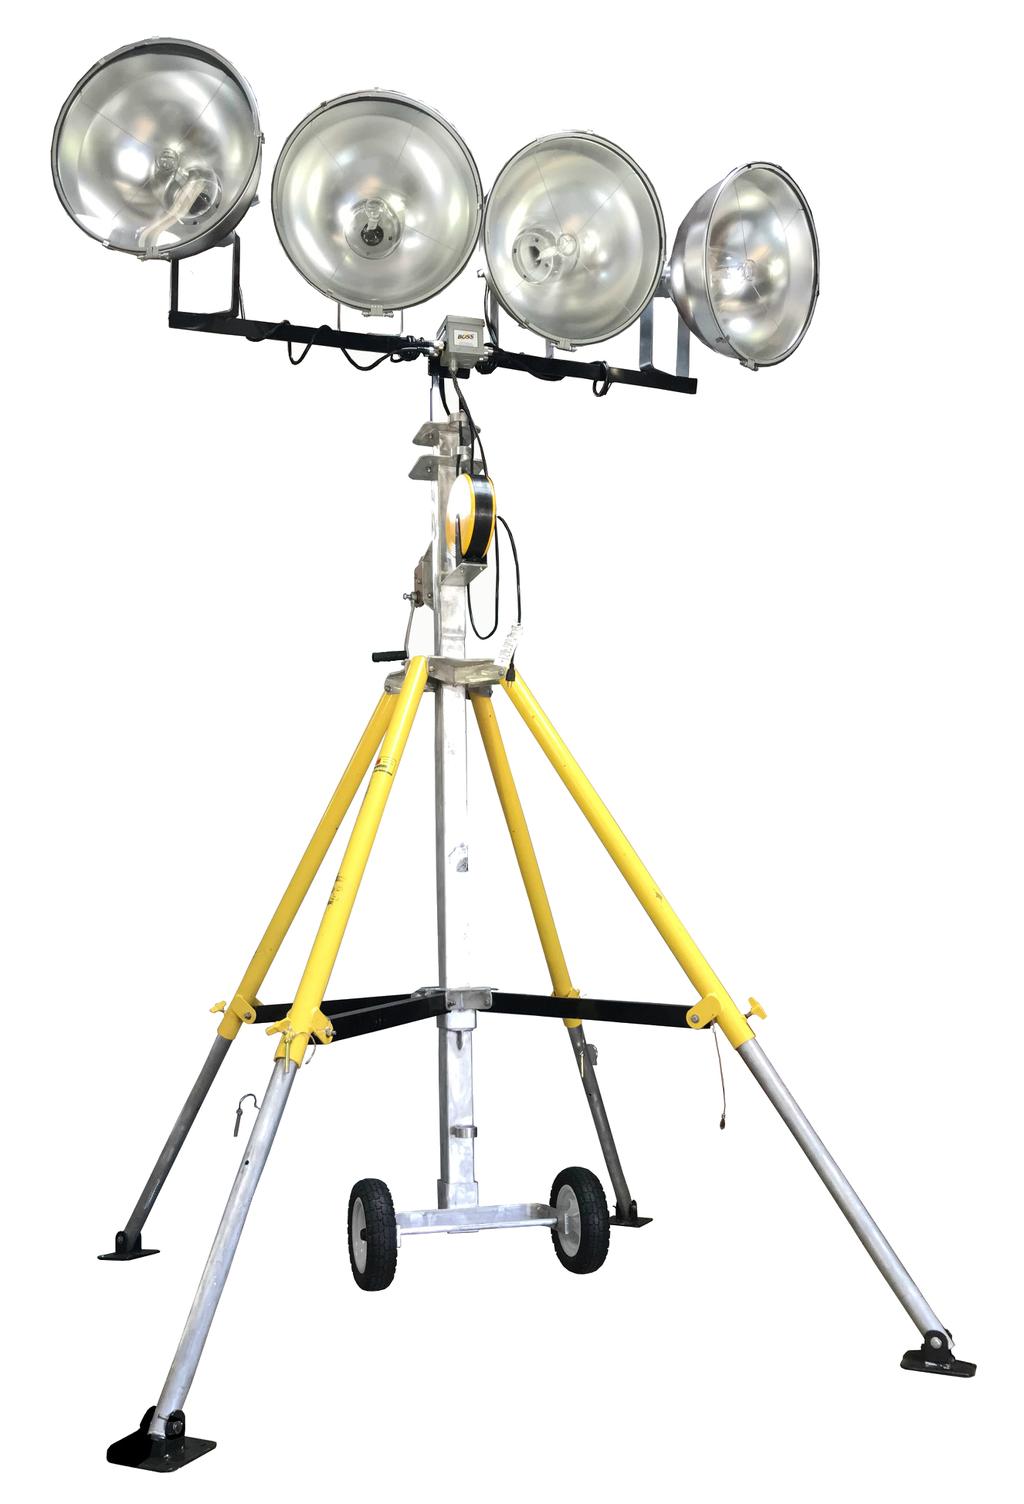 Quad Pod Portable Floodlight 1000w Metal Halide - 300w LED - UL Validated being offered by Boss Used By Tank & Vessel, Offshore, & Marine Servicing Contractors Outside Perimeter Floodlighting for